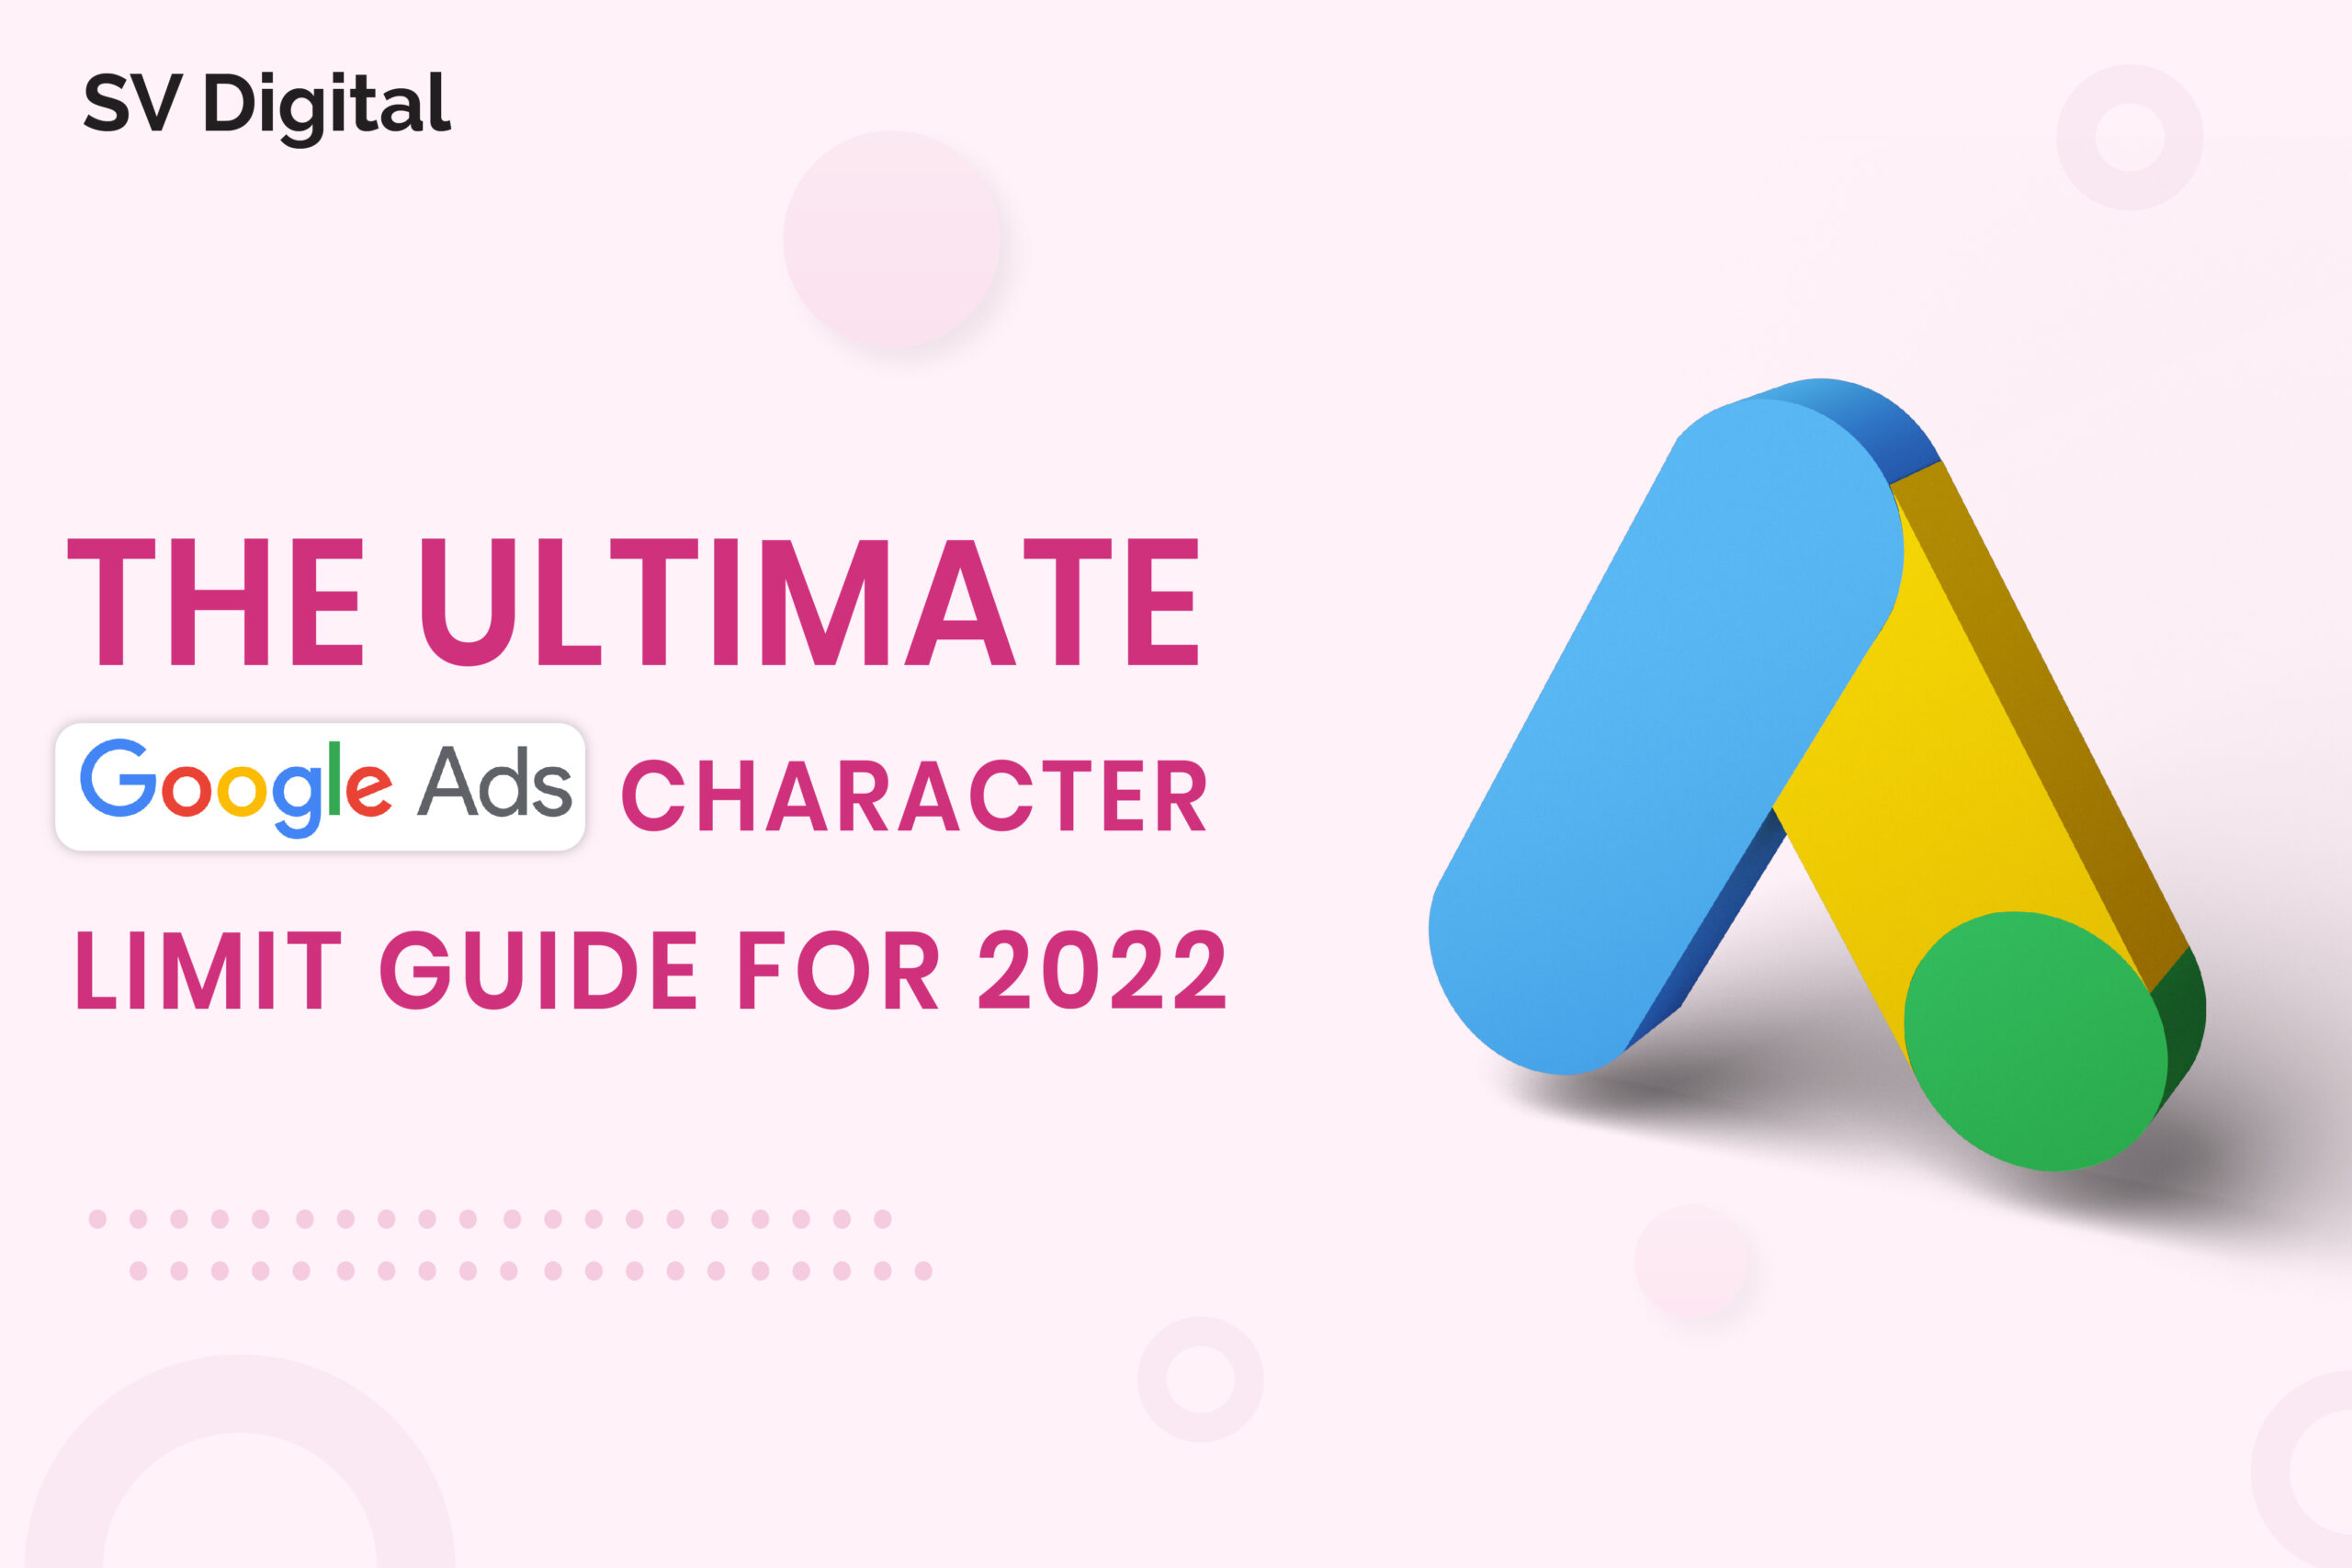 The Ultimate Google Ads Character Limit Guide For 2022